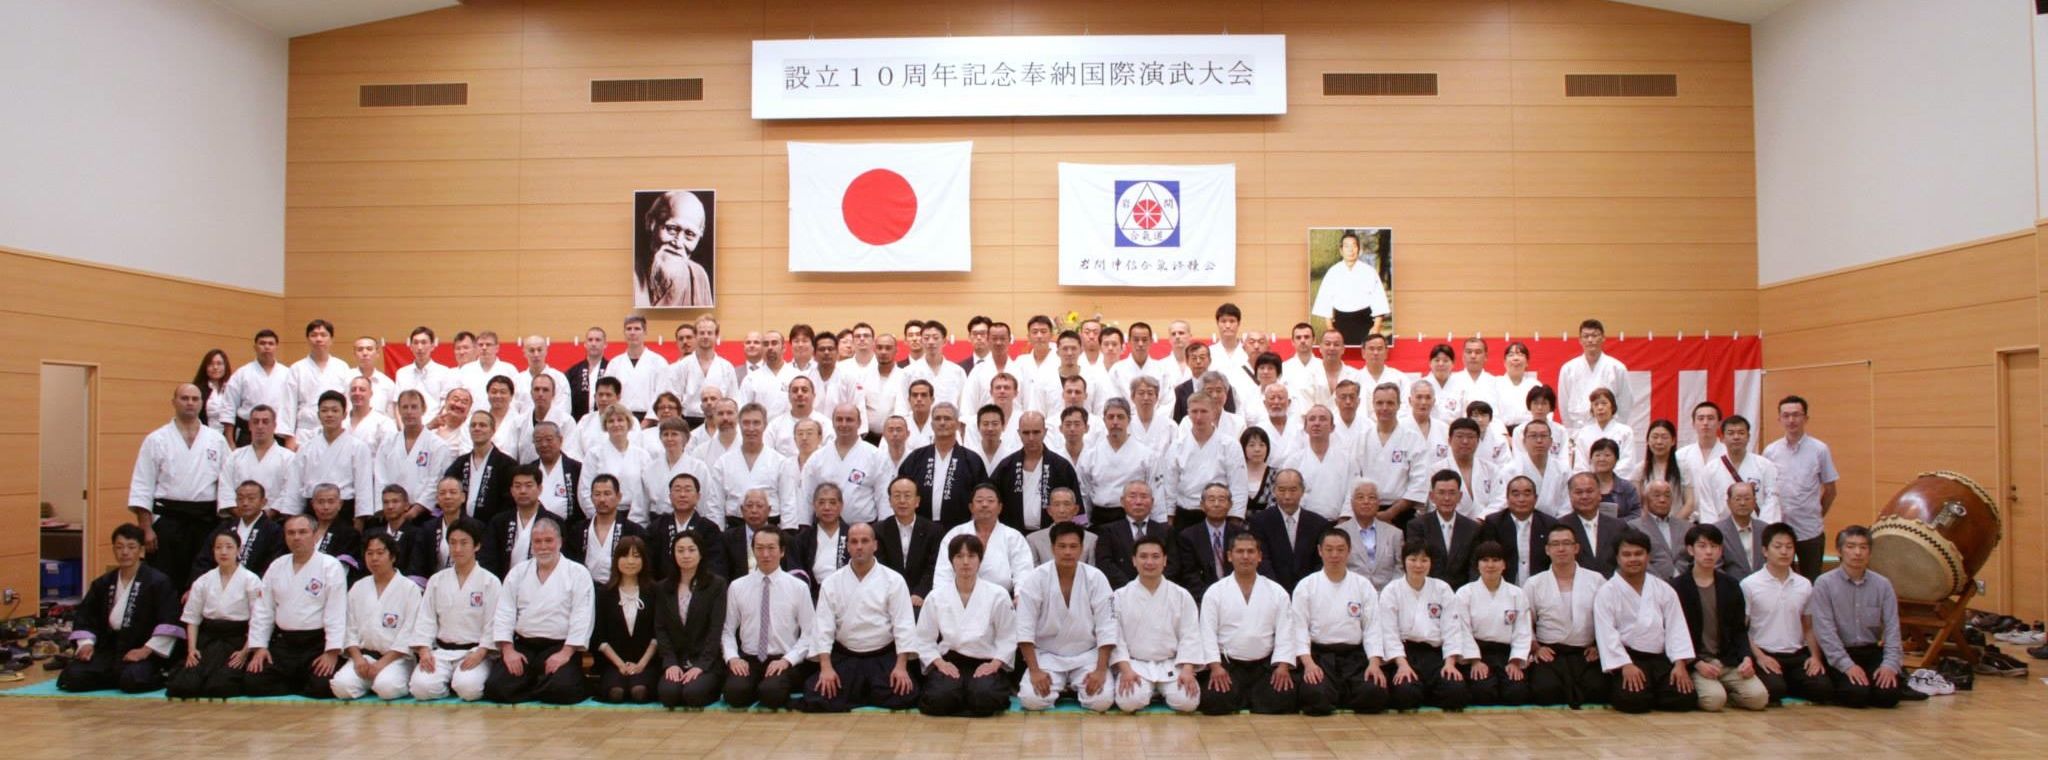 Group photo from the 10th Anniversary Demonstration in Tokyo, Japan 2014